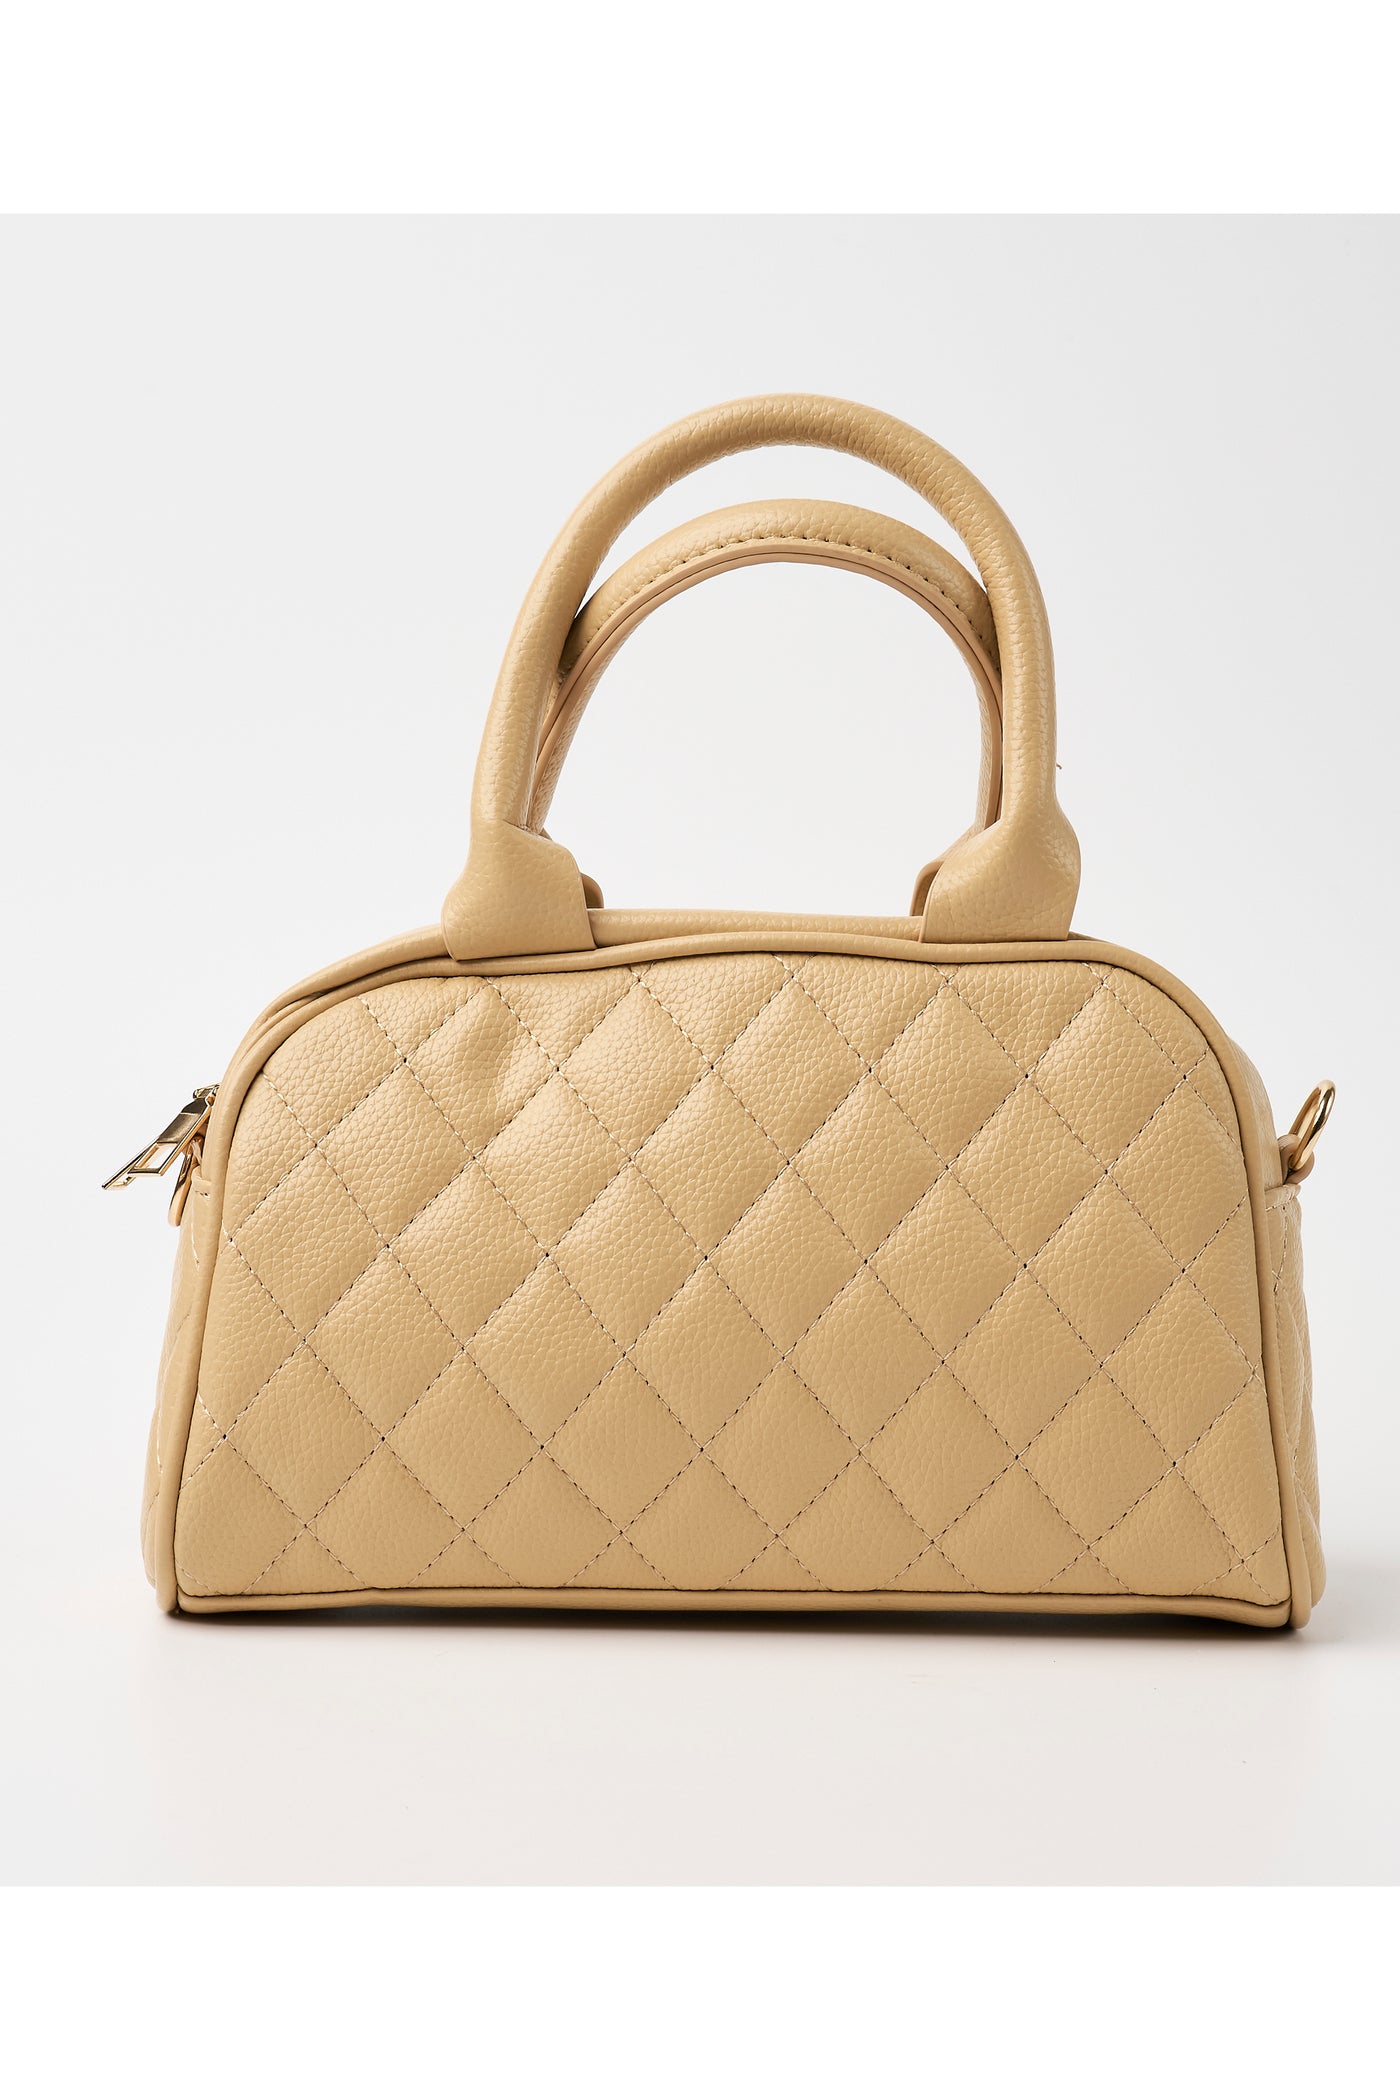 storets.com Bonnie Quilted Tote